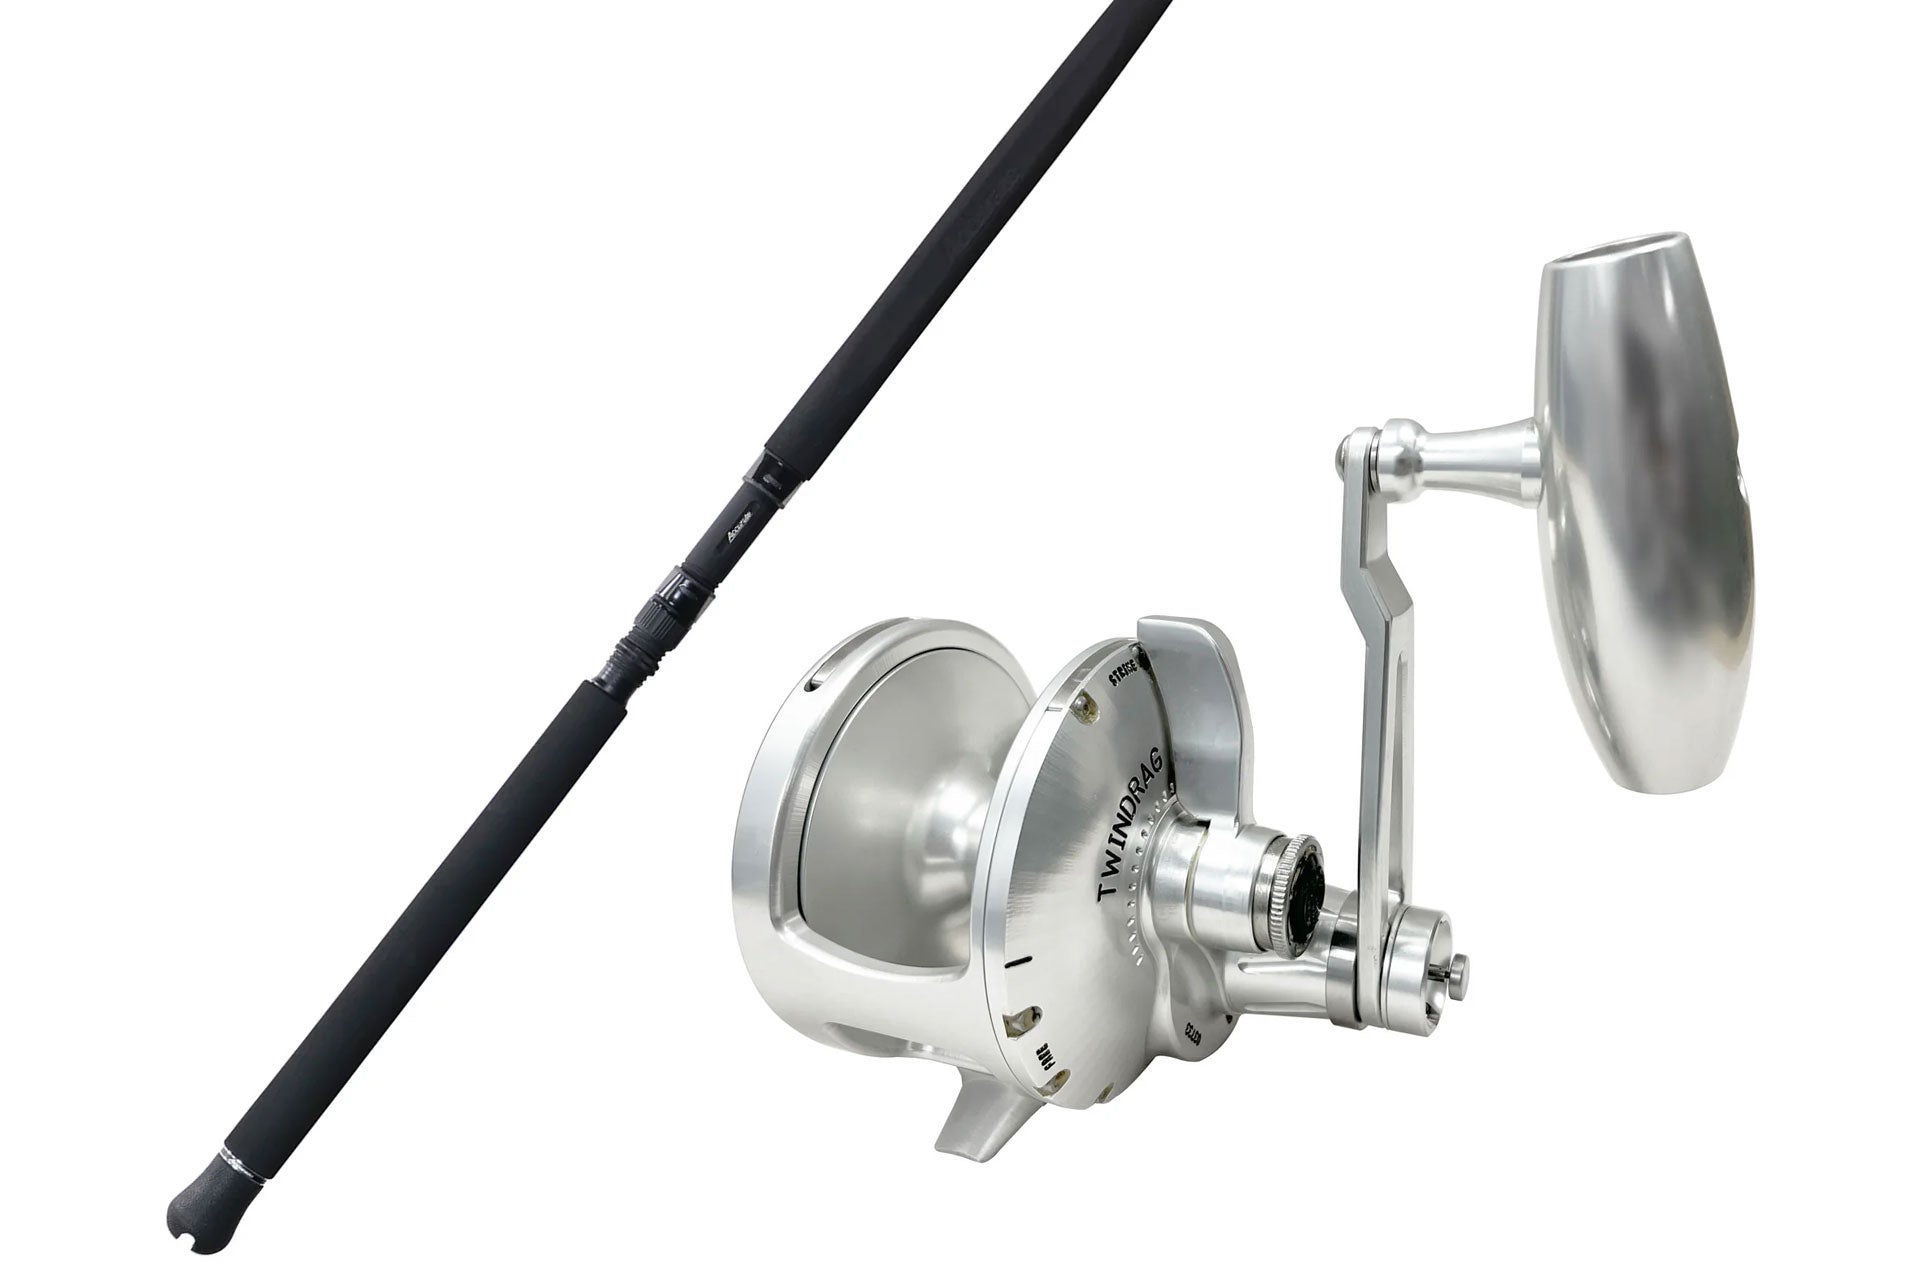 Valiant 800N SPJ Combo – Accurate Fishing